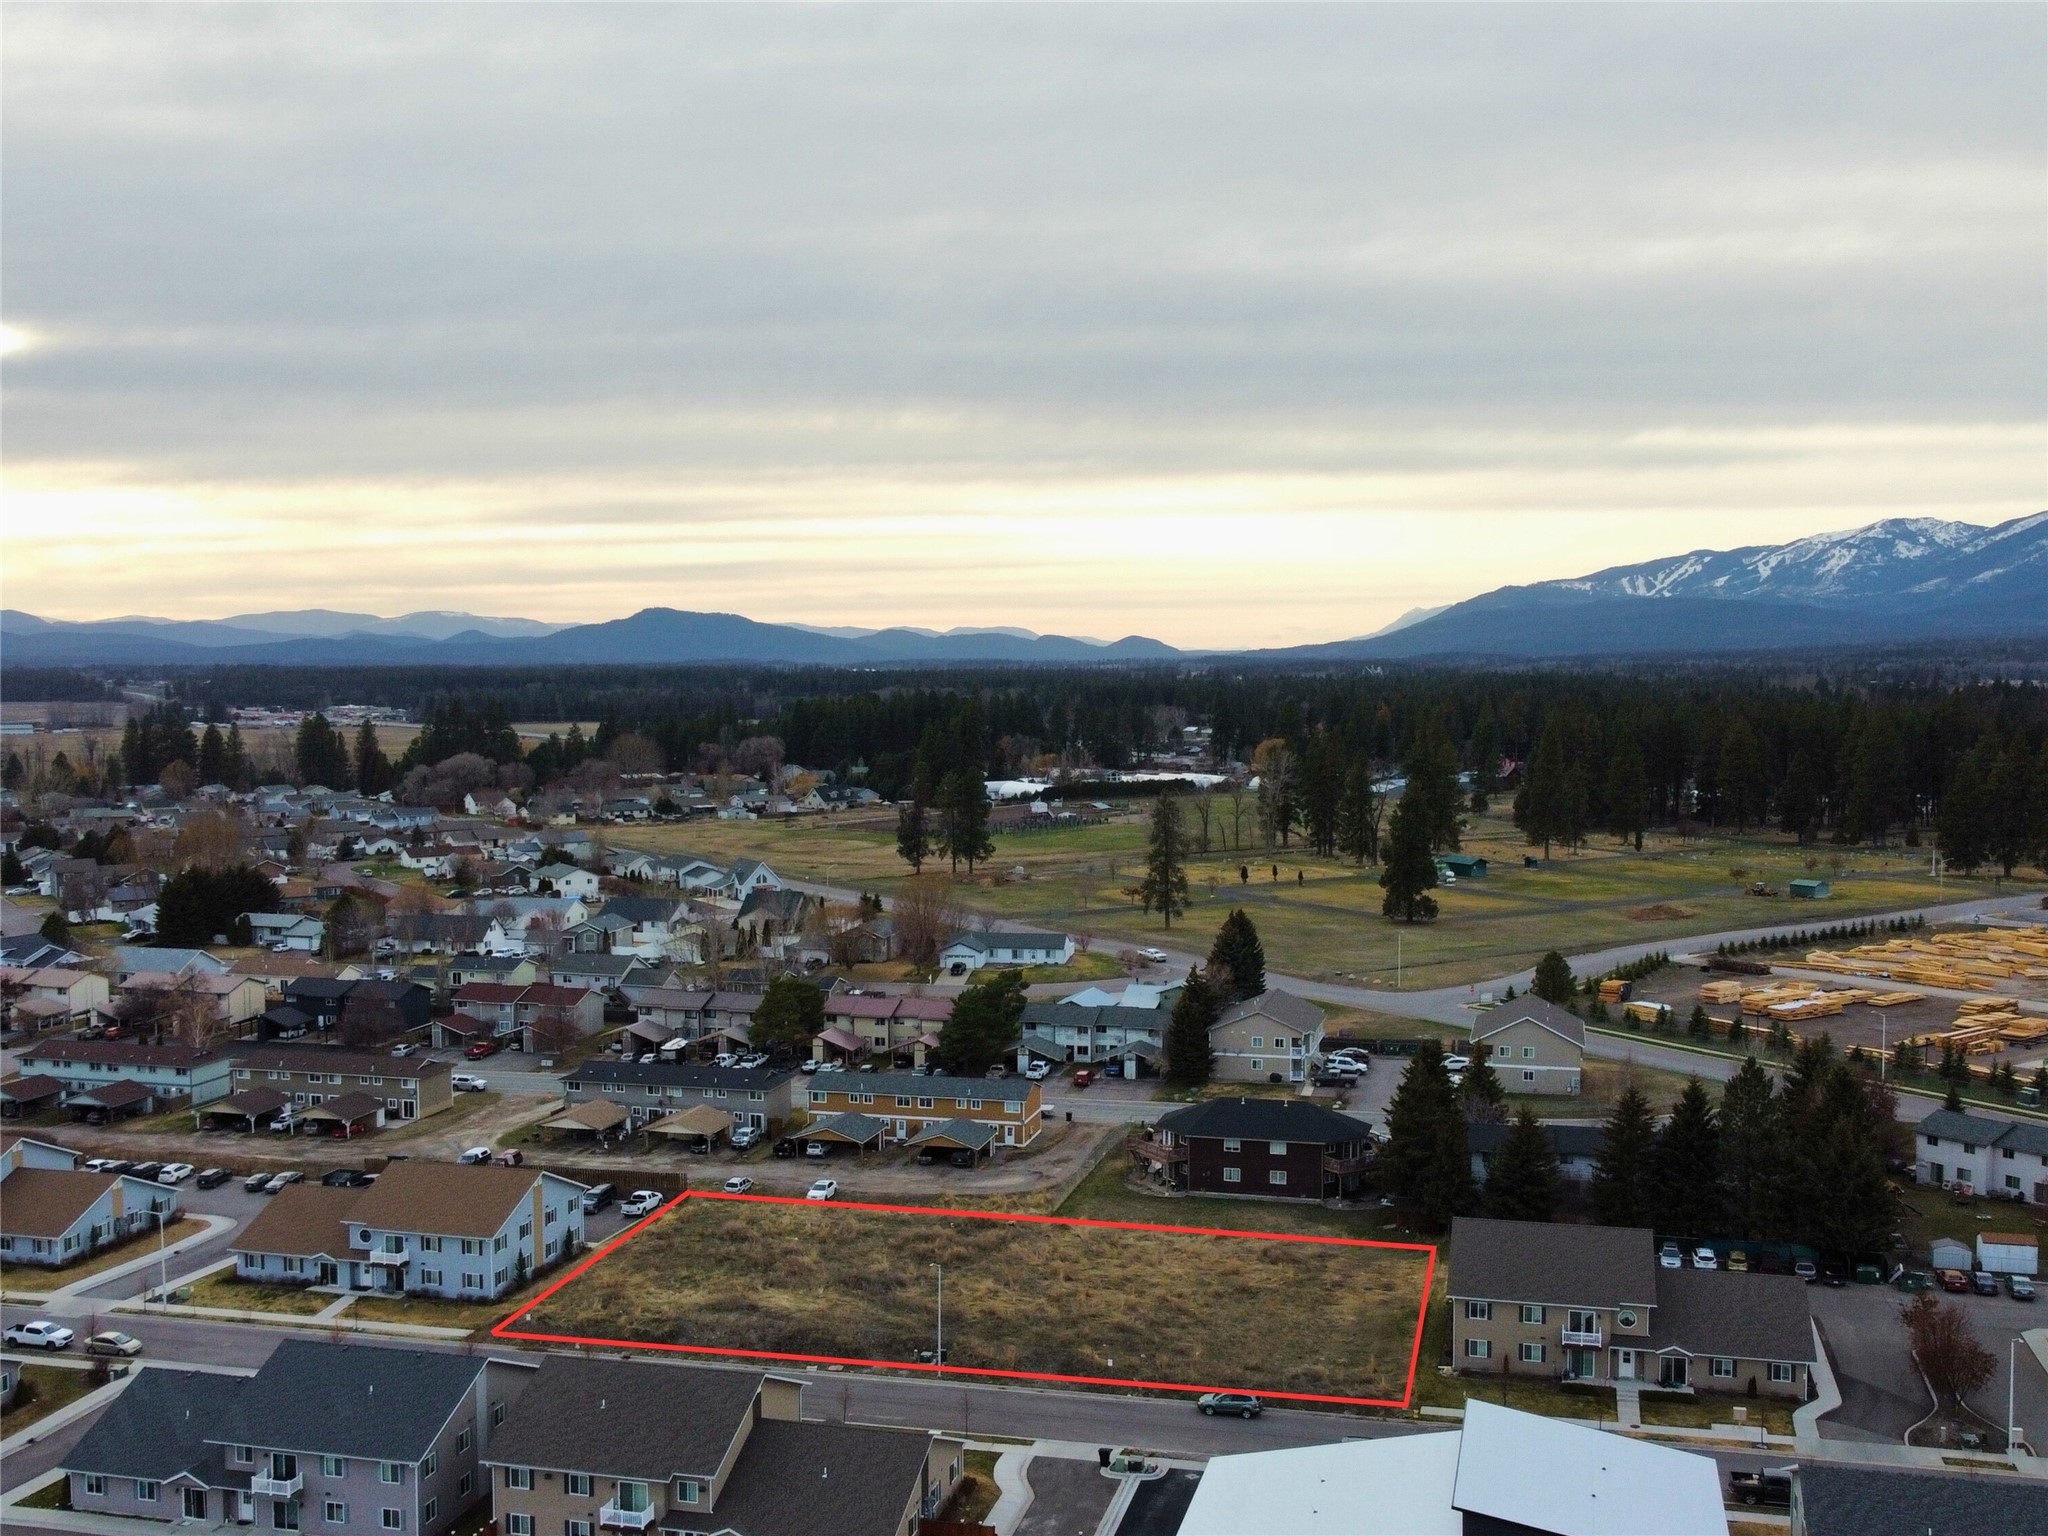 Investors take note! This .68 acre lot is primed and ready – with ALL PERMITS APPROVED – for (2) 6-plex buildings (a total of 12 doors) in the charming and growing town of Columbia Falls. With building plans already approved by the city, each unit is designed for maximum efficiency and storage: 3 bedrooms, 2 bathrooms, 1,000+ SF, lots of natural light, in-unit laundry, deck, single garage space, additional rear parking space on-site and designed with a shared driveway between both buildings. Conveniently located in-town, these lots are surrounded by other successful multi-family buildings, treelined sidewalks, and there's a community park/playground in the neighborhood.  Just 10 minutes to the International Airport, 25 minutes to Kalispell, 15 minutes to Whitefish and 30 minutes to Glacier National Park. Call Liz McGavin (406-212-3702) or your Real Estate professional.